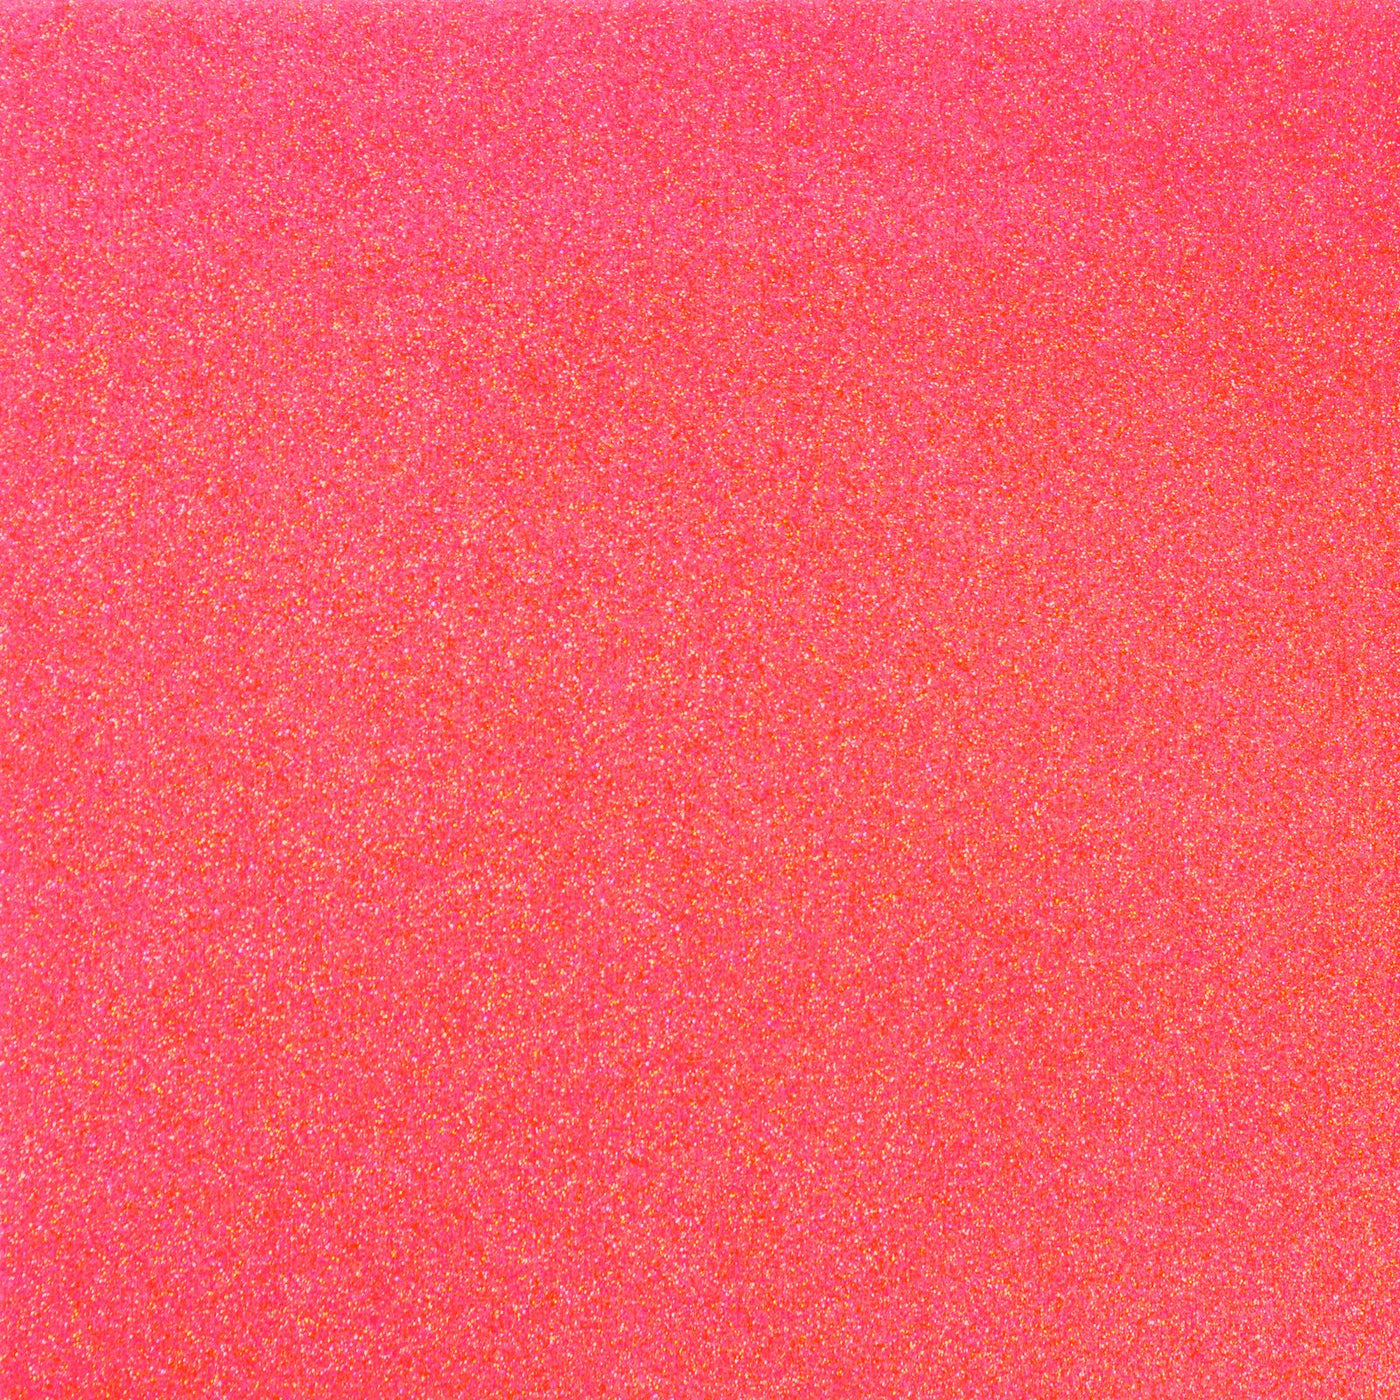 CORAL NEON 12x12 glitter cardstock from American Crafts